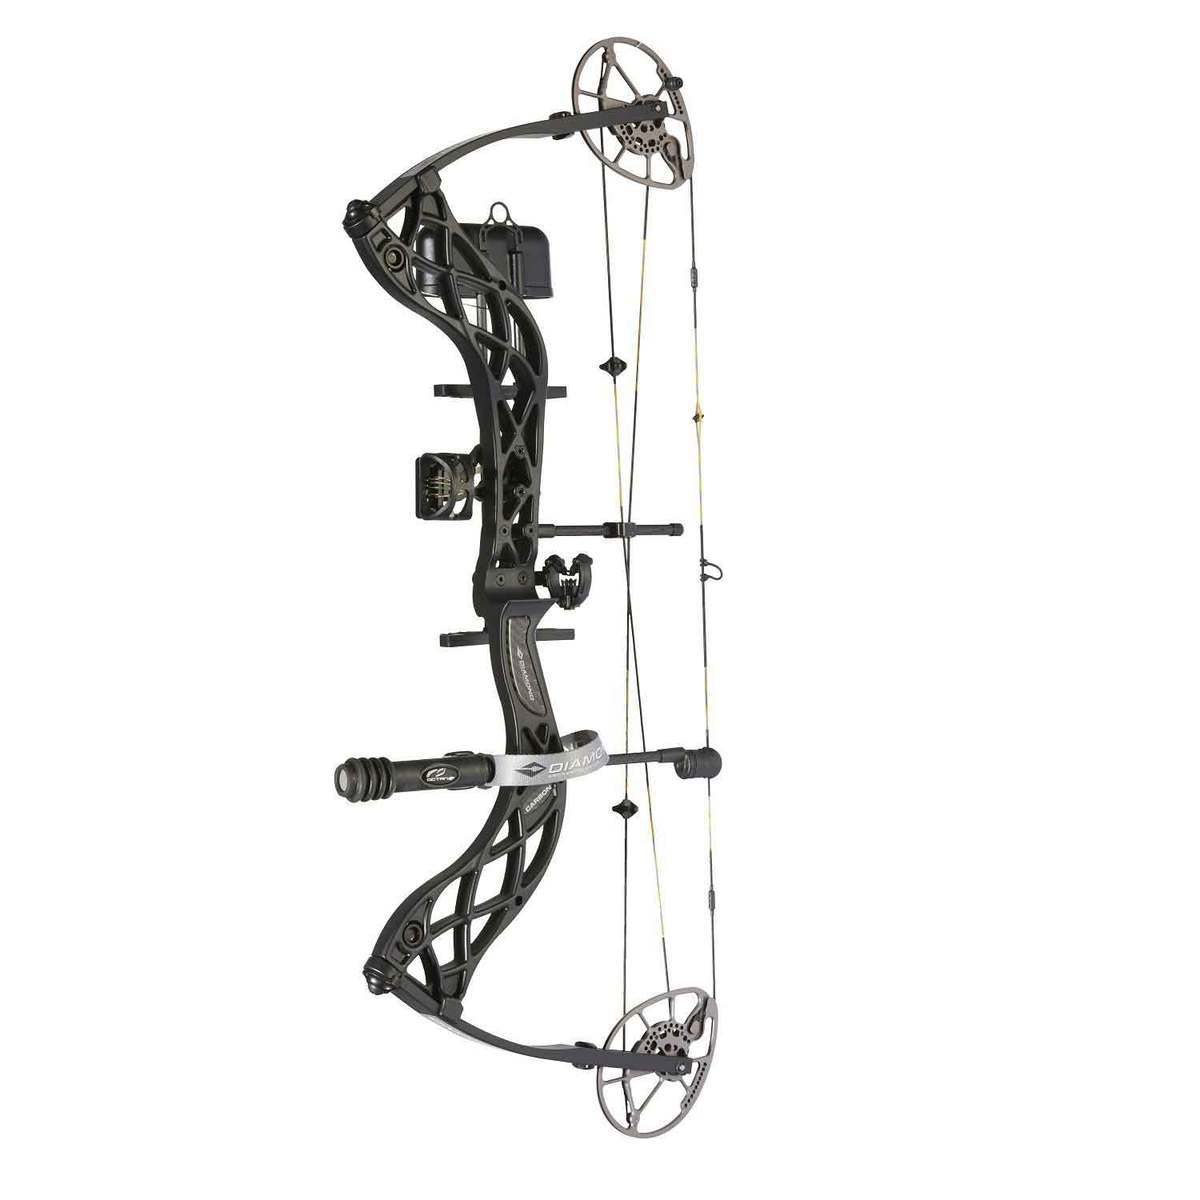 SA Sports Gator Compound Bowfishing Bow Package Right Hand